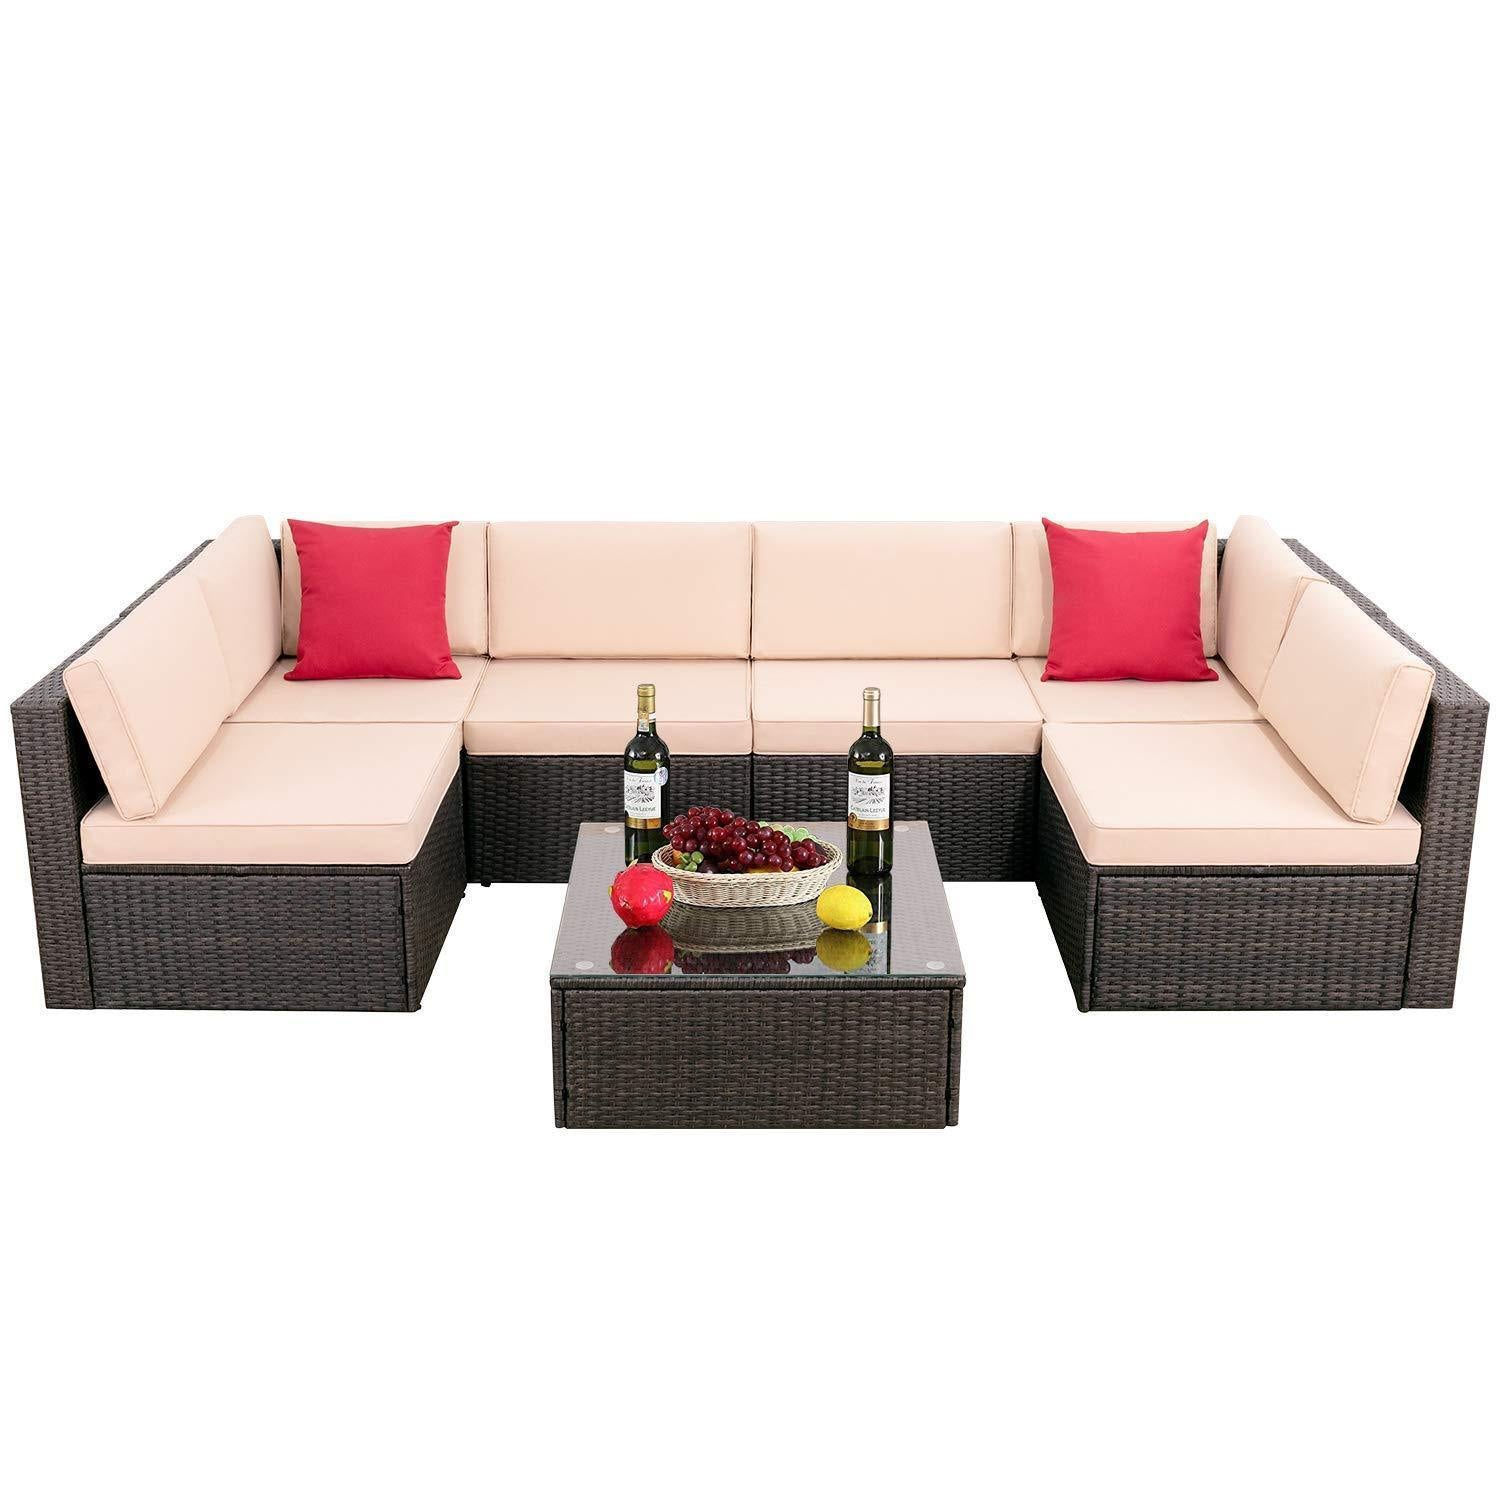 Walnew 7 Pieces Outdoor Rattan Sectional Sofa